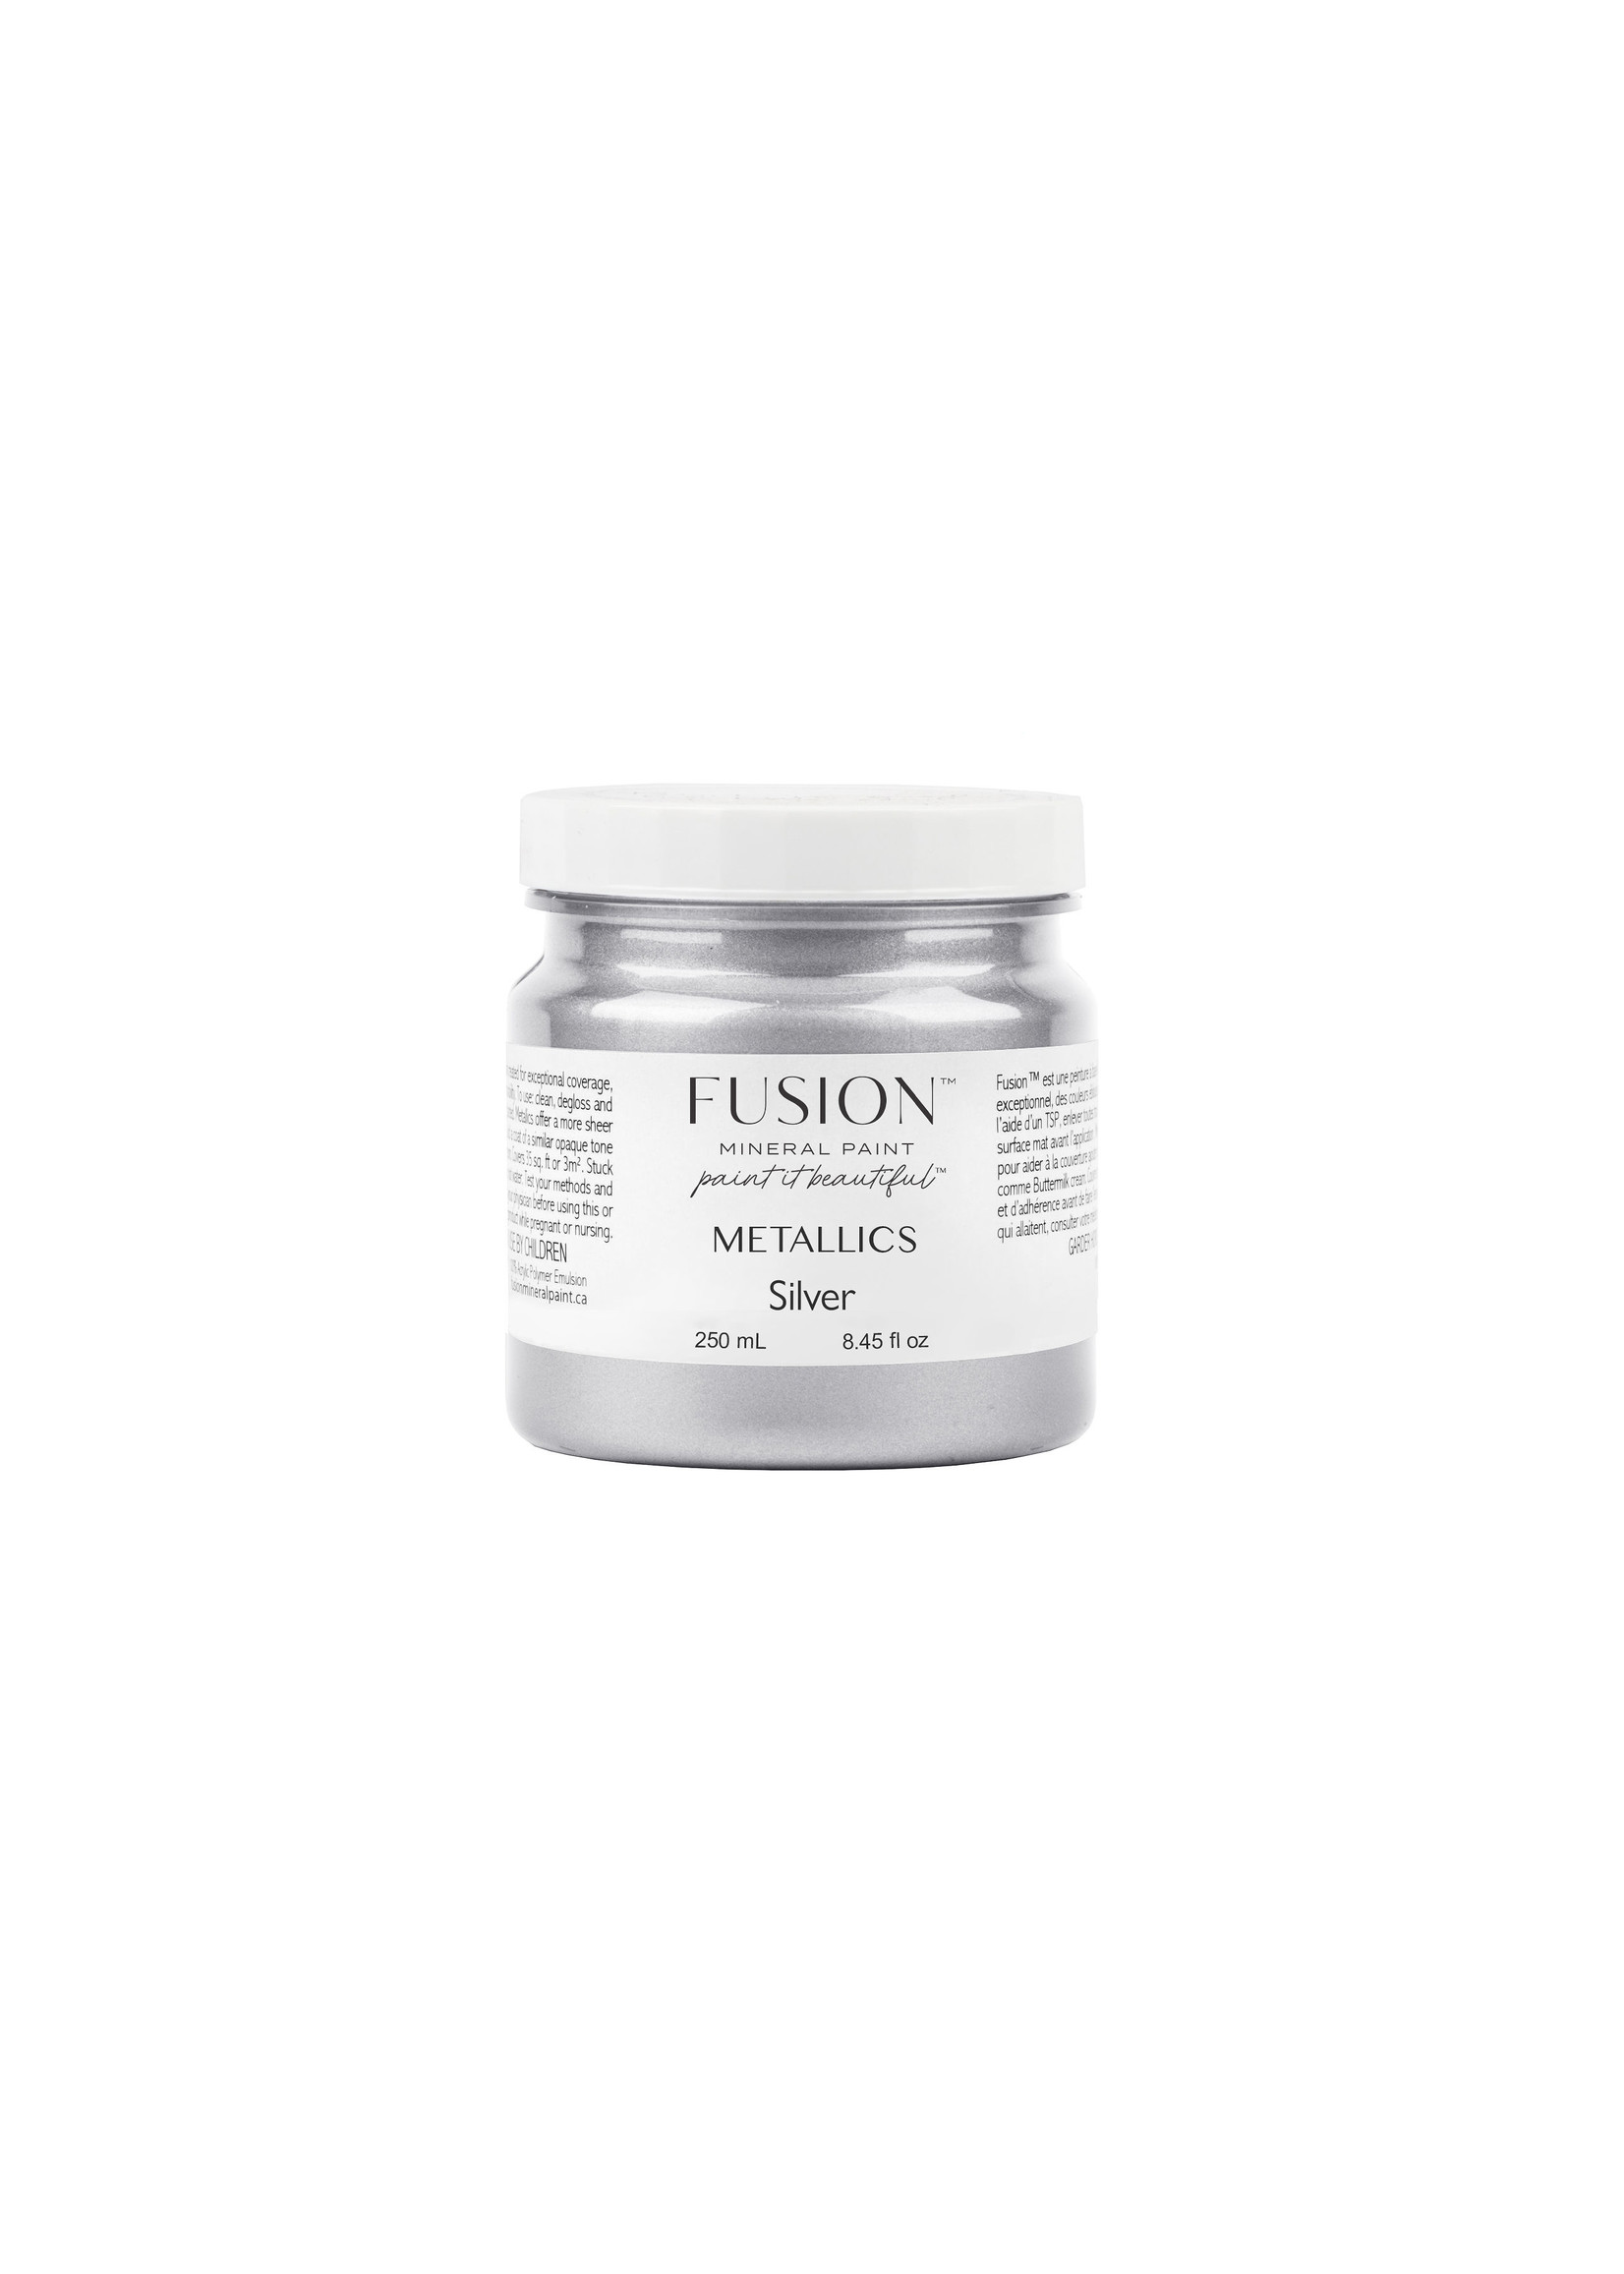 Fusion Mineral Paint™ - Metallic Silver